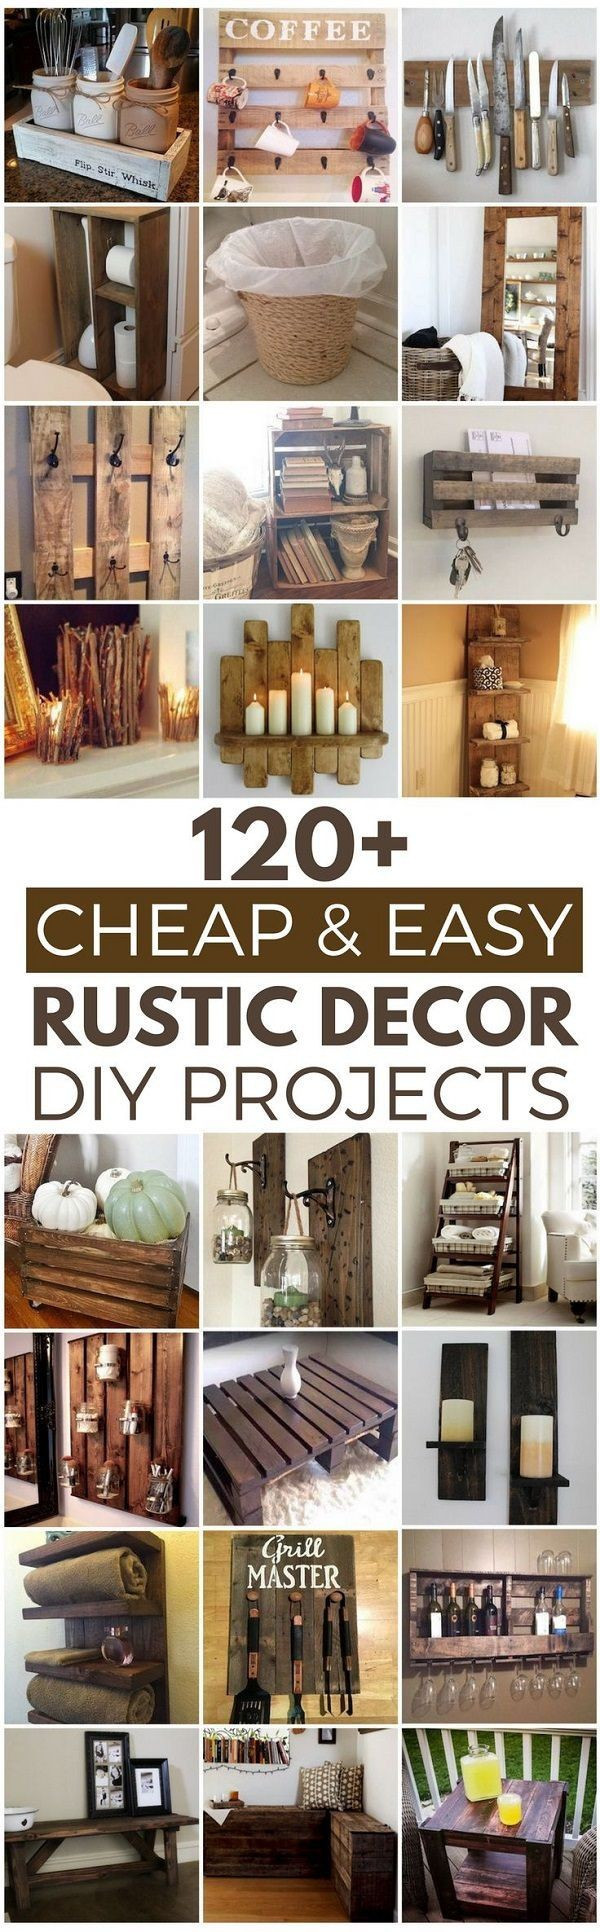 17 Lovely Decorative Vase Filler Ideas 2024 free download decorative vase filler ideas of www pinterest home decor new easy home decorating unique 15 cheap inside www pinterest home decor new easy home decorating unique 15 cheap and easy diy vase f